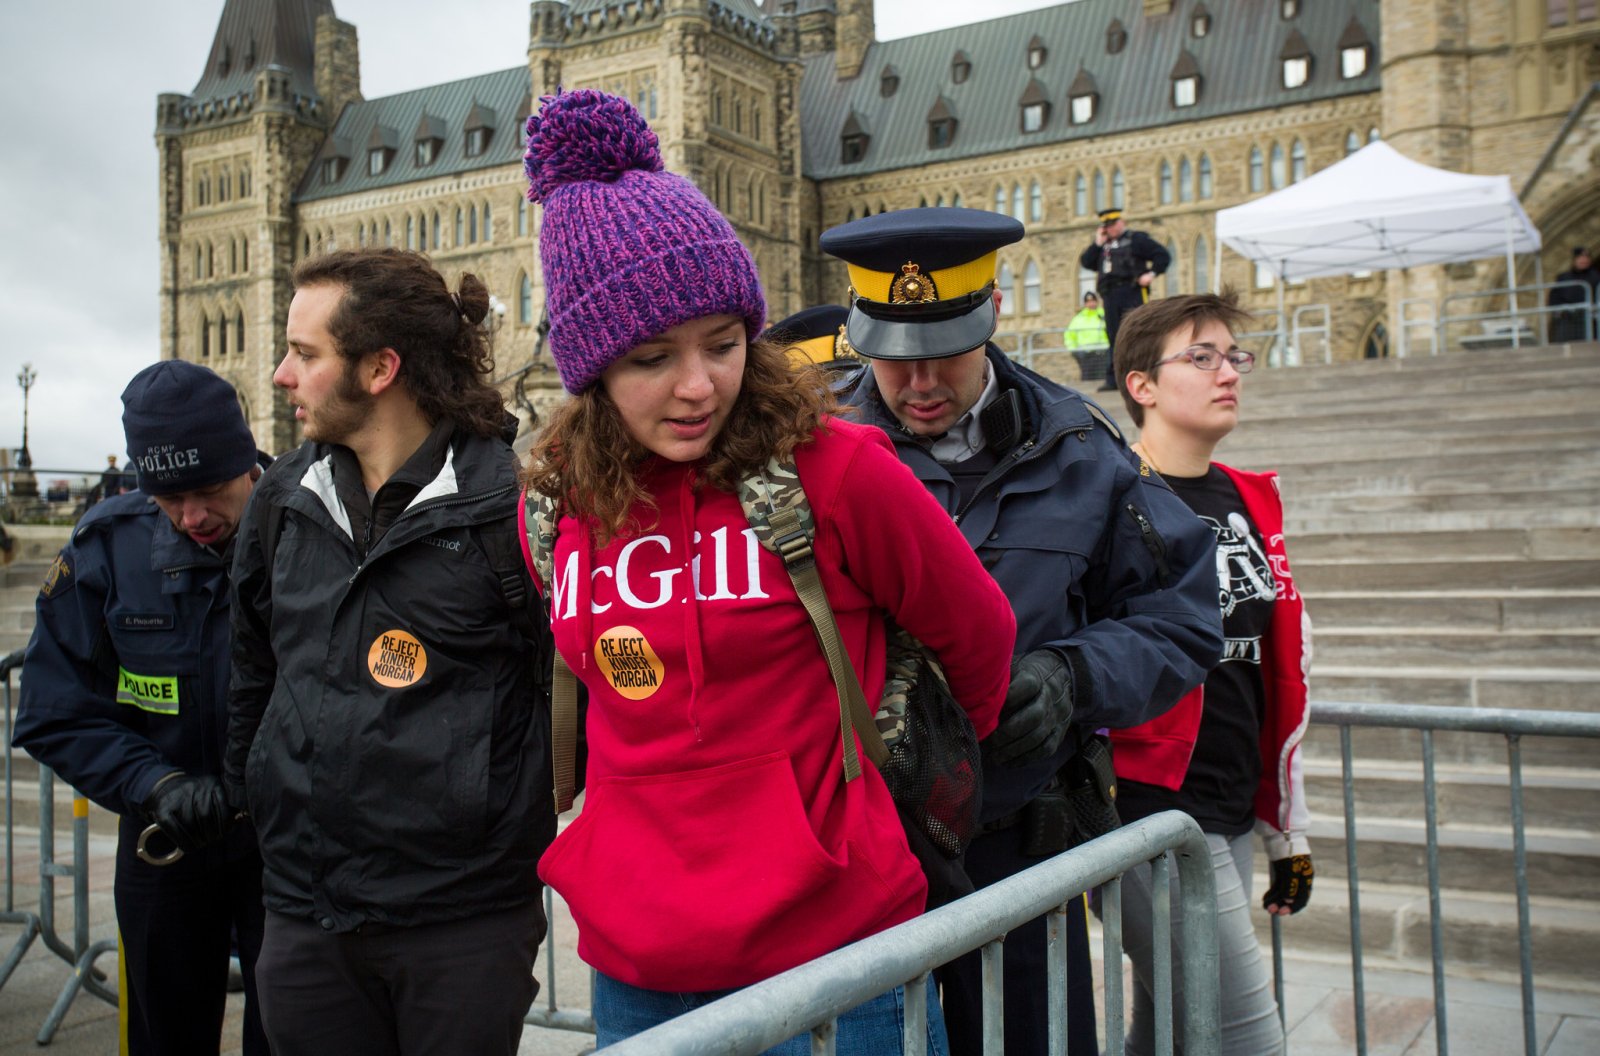 Climate 101, pipeline protest, Trans Mountain expansion, Keep it in the Ground, Parliament Hilll